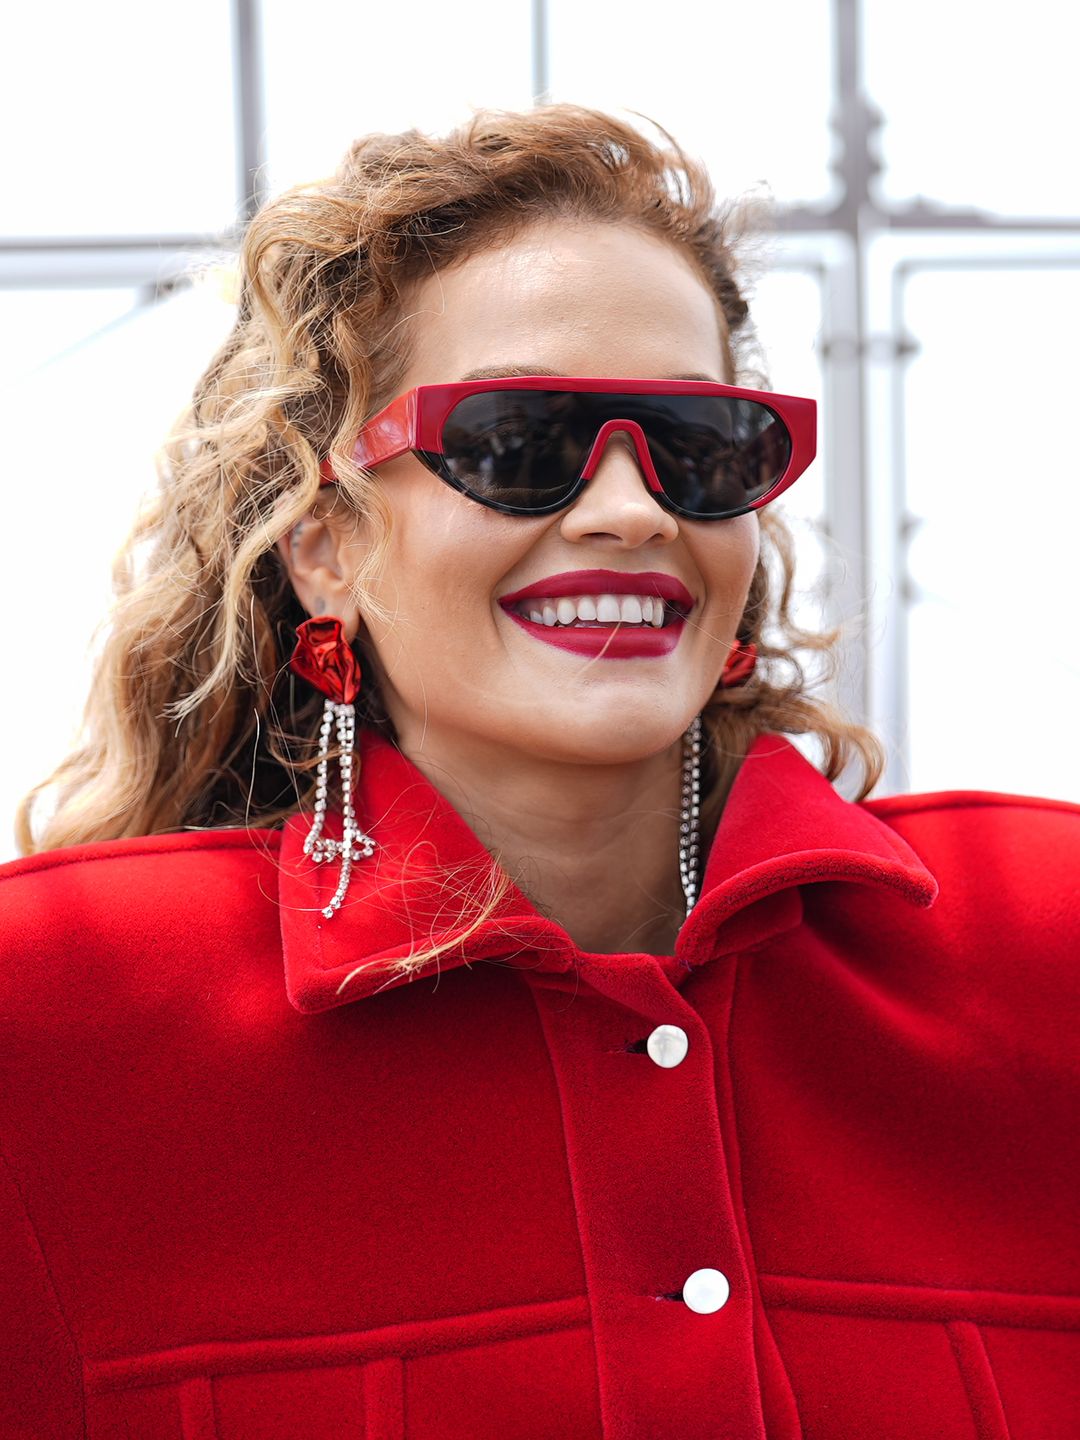 Rita Ora visits the Empire State Building in a red dress, sunglasses and earings